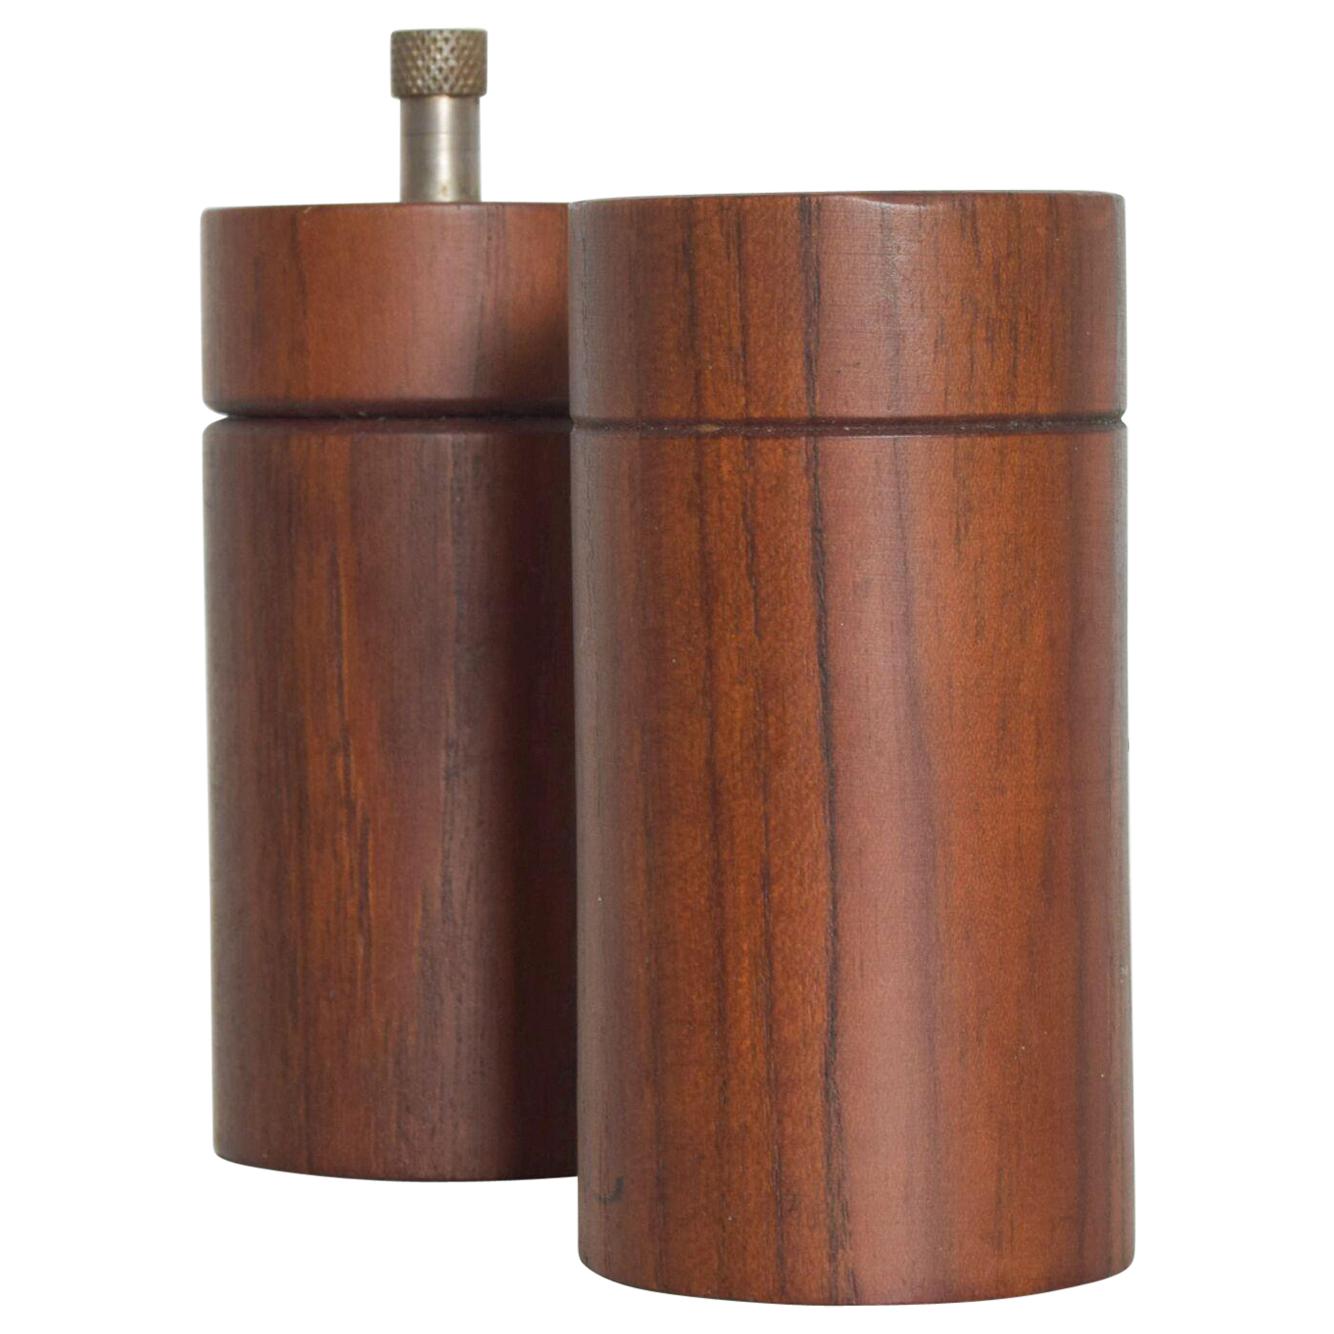 AMBIANIC offering
Danish Modern Teakwood Saltshaker and Pepper Grinder Set 
Mid Century Modern Classic Vintage Item.
Design Jens Quistgaard Stamp made in England by Galatix
Item is in unrestored vintage preowned condition.
Refer to images